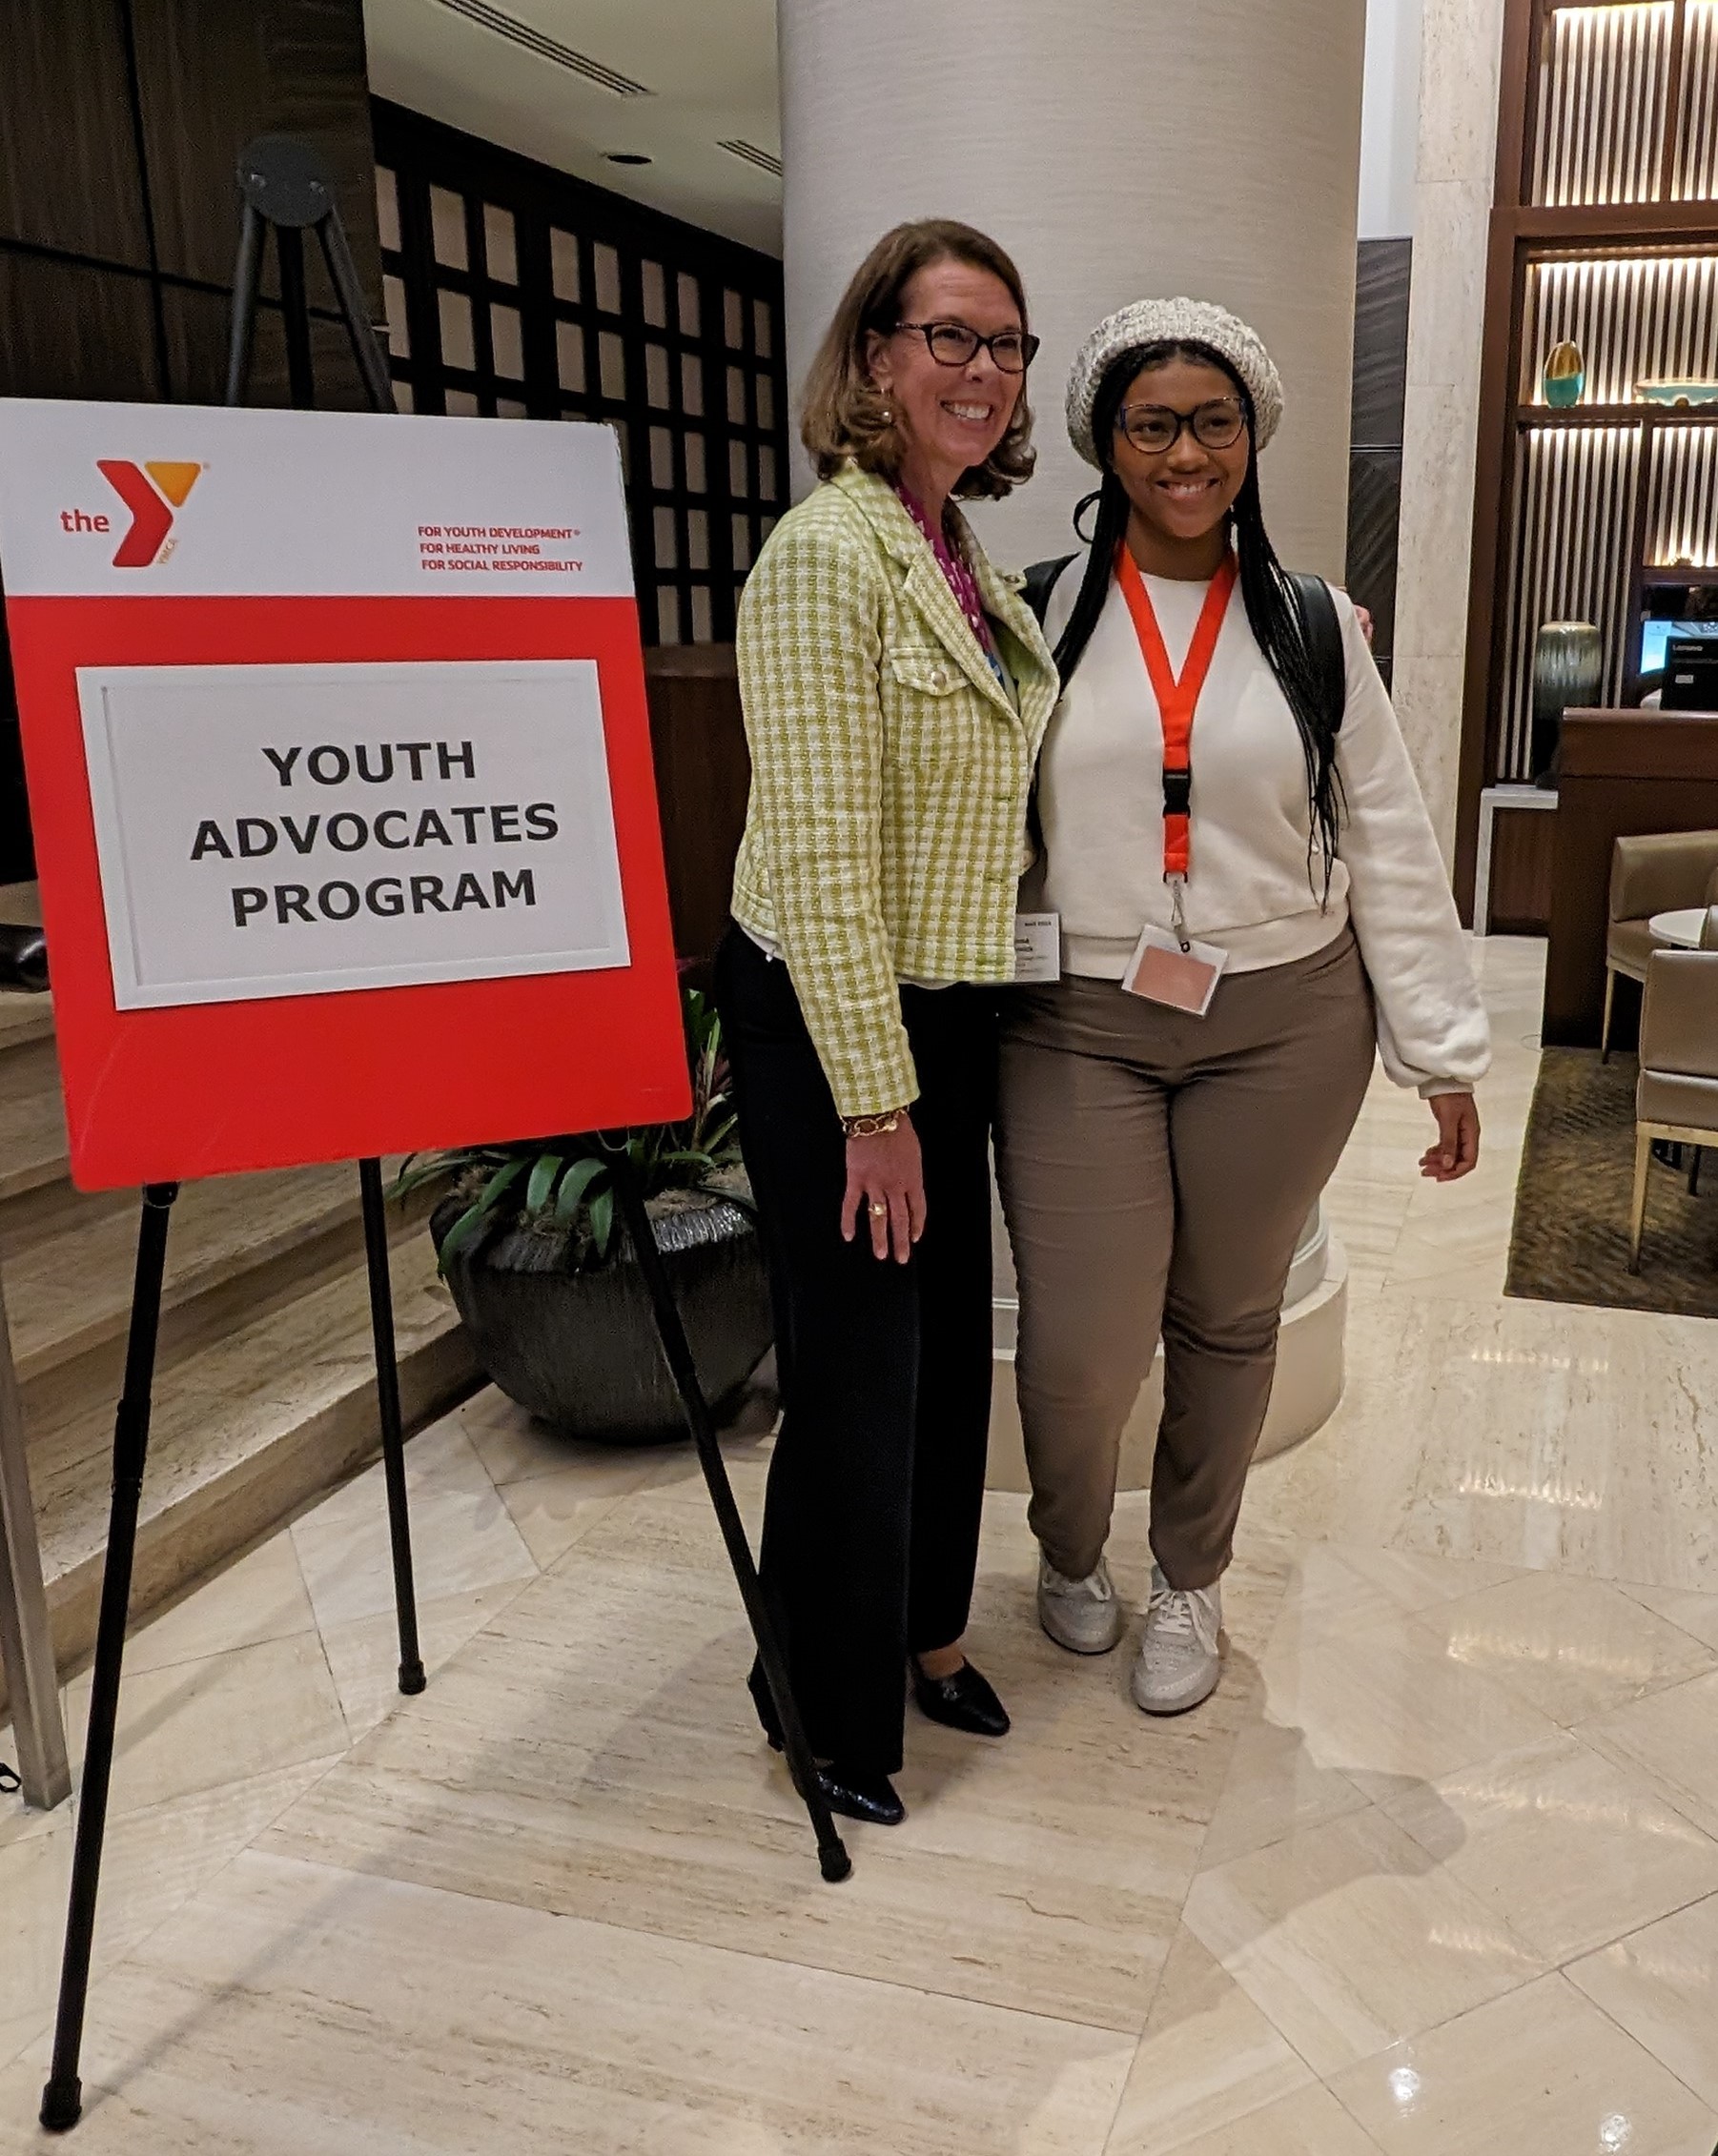 Suzanne with youth advocate